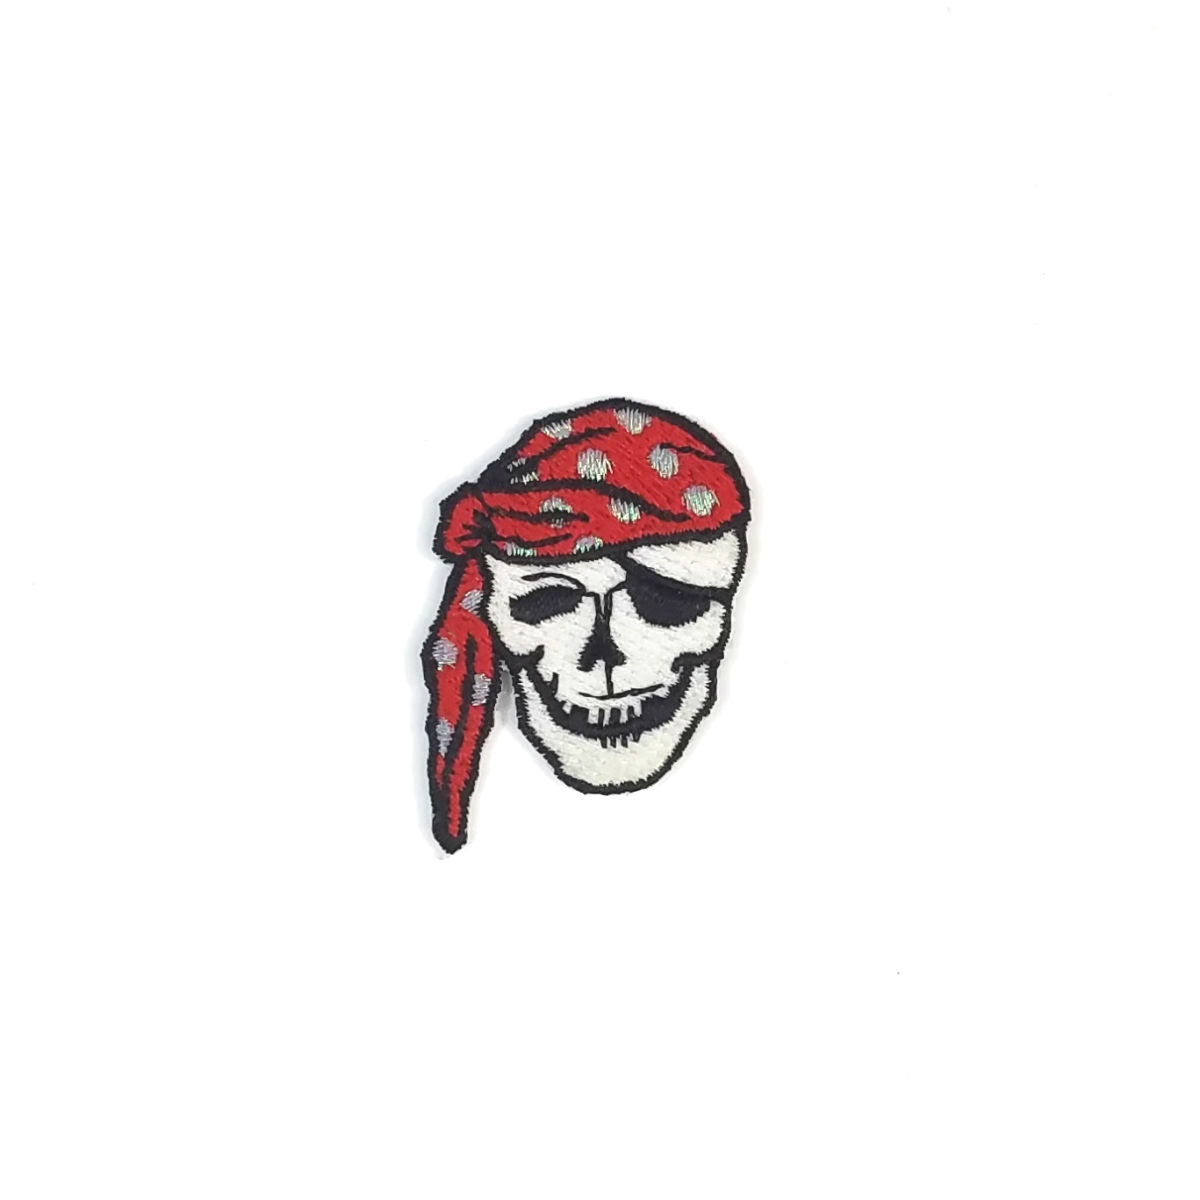 2" smiling pirate skull with eyepatch and red headscarf with metallic dots embroidered patch